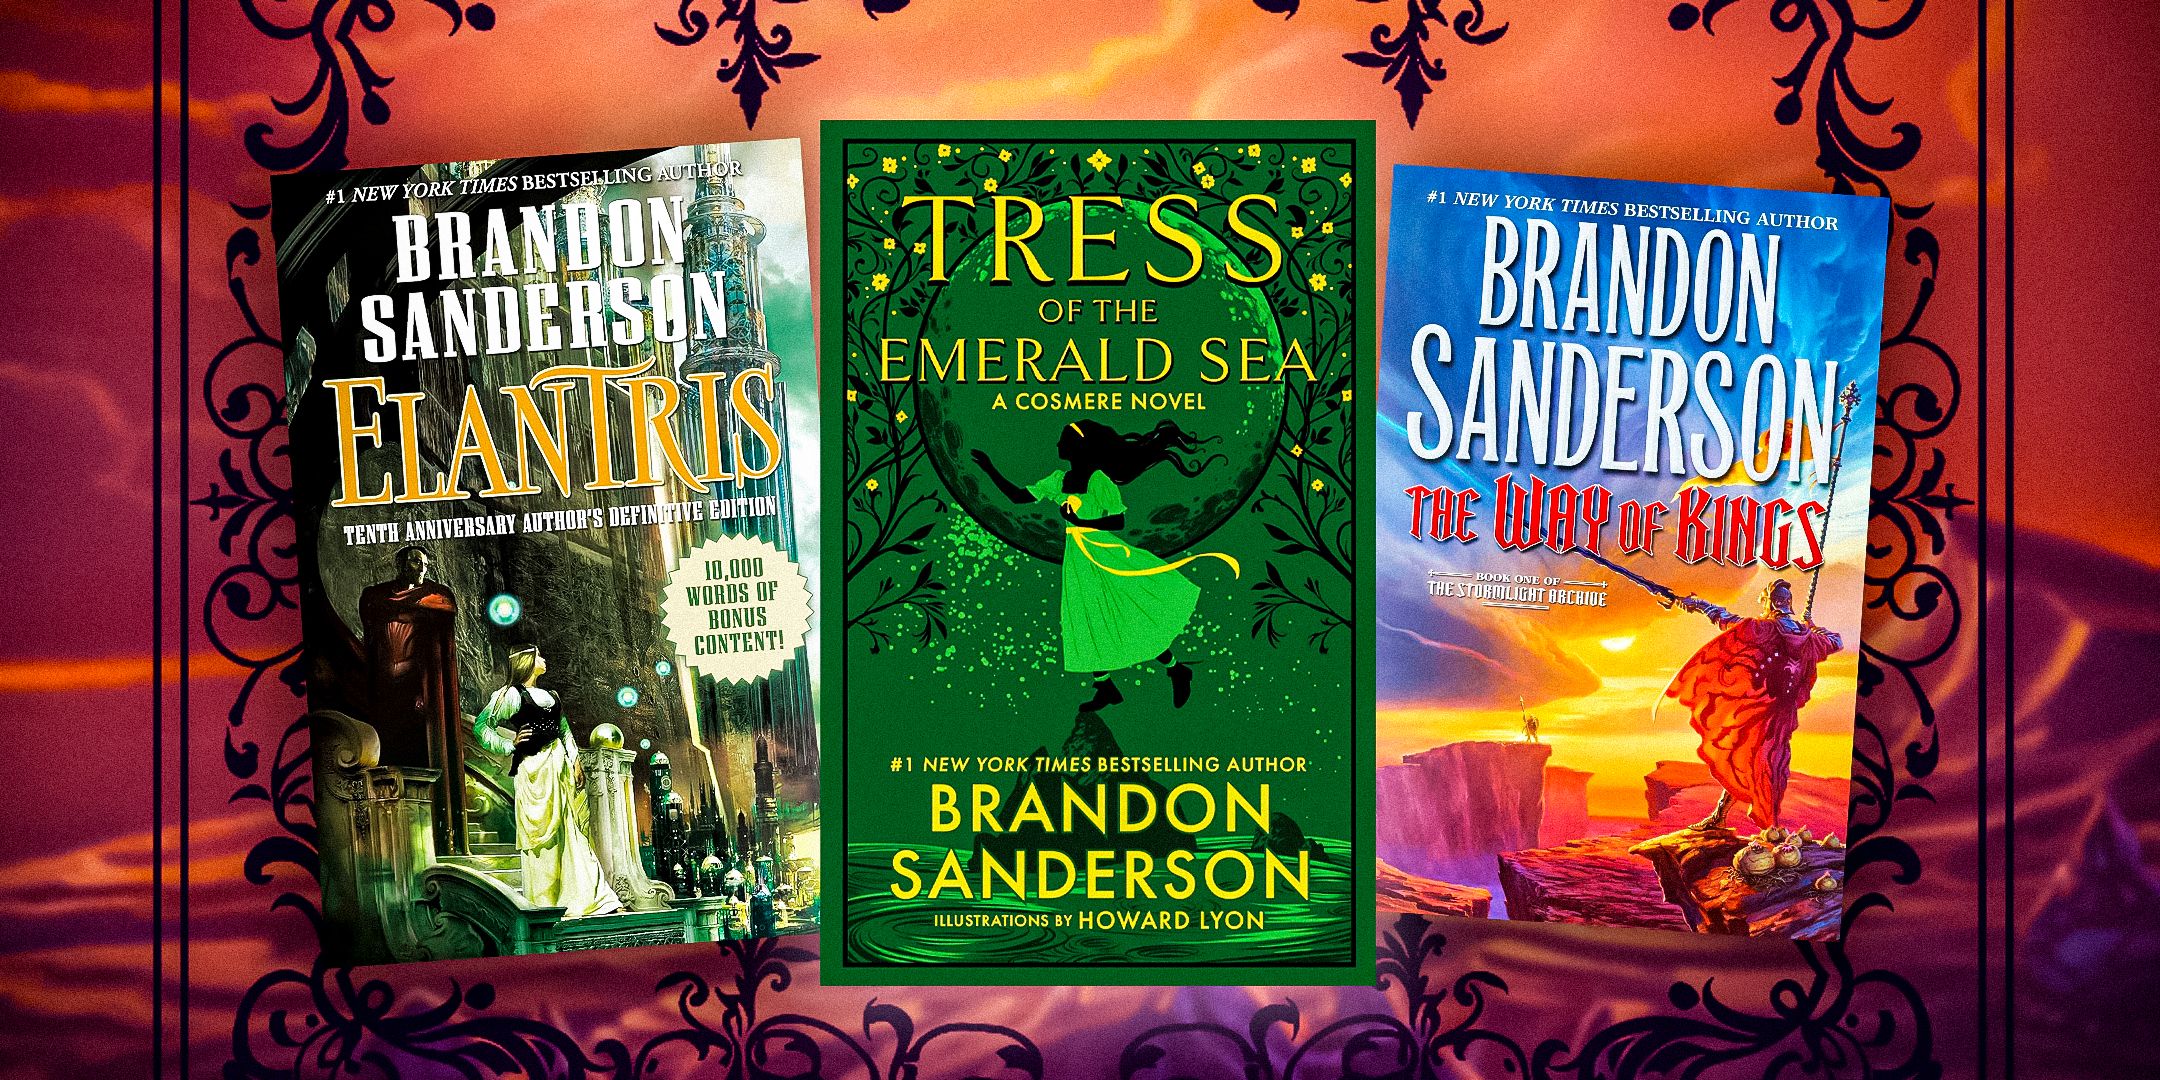 Elantris, Tress of the Emerald Sea and The Way of Kings cover